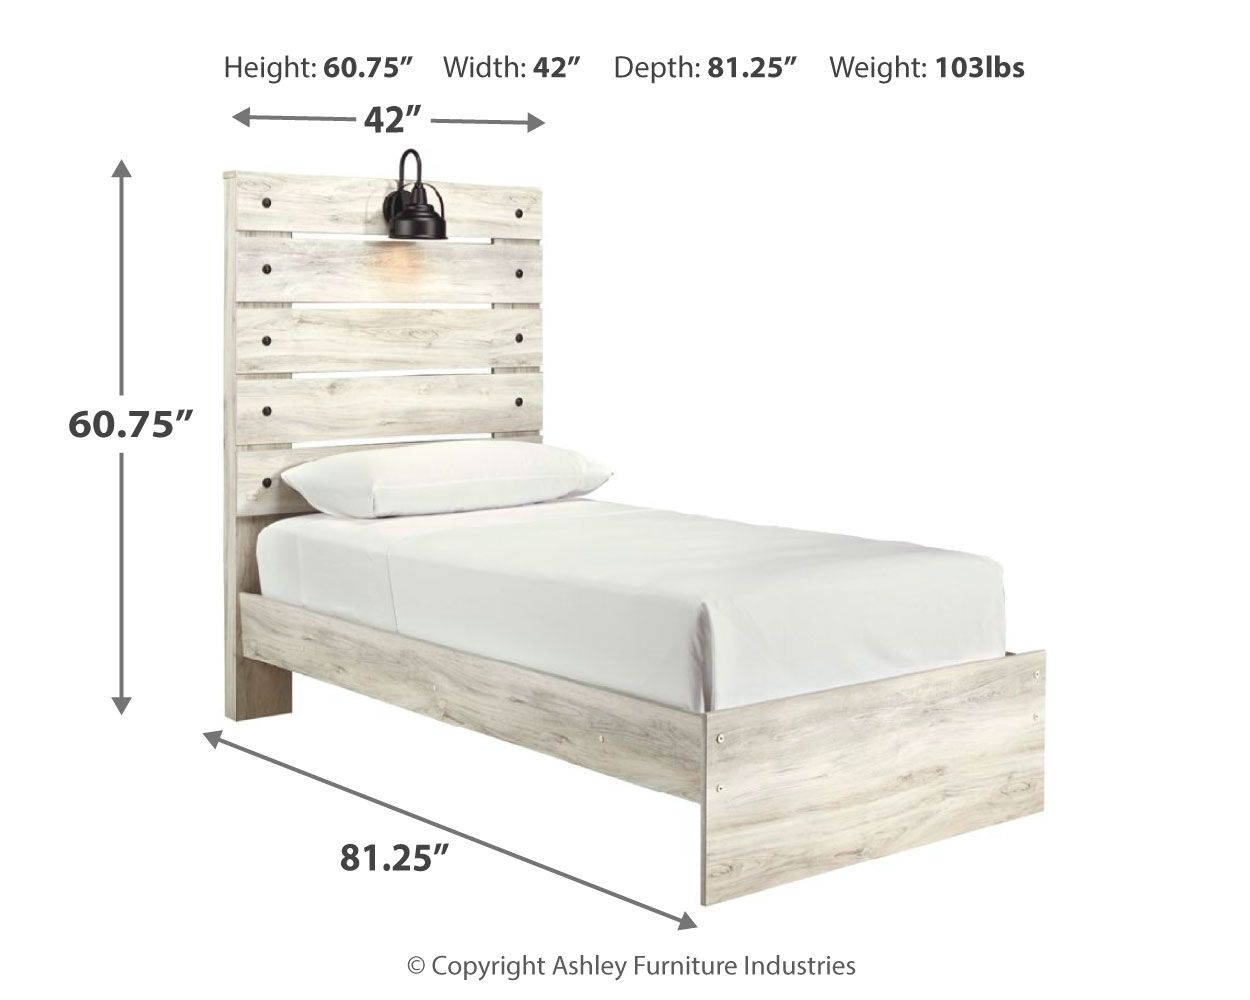 Cambeck - Youth Bedroom Set - Tony's Home Furnishings